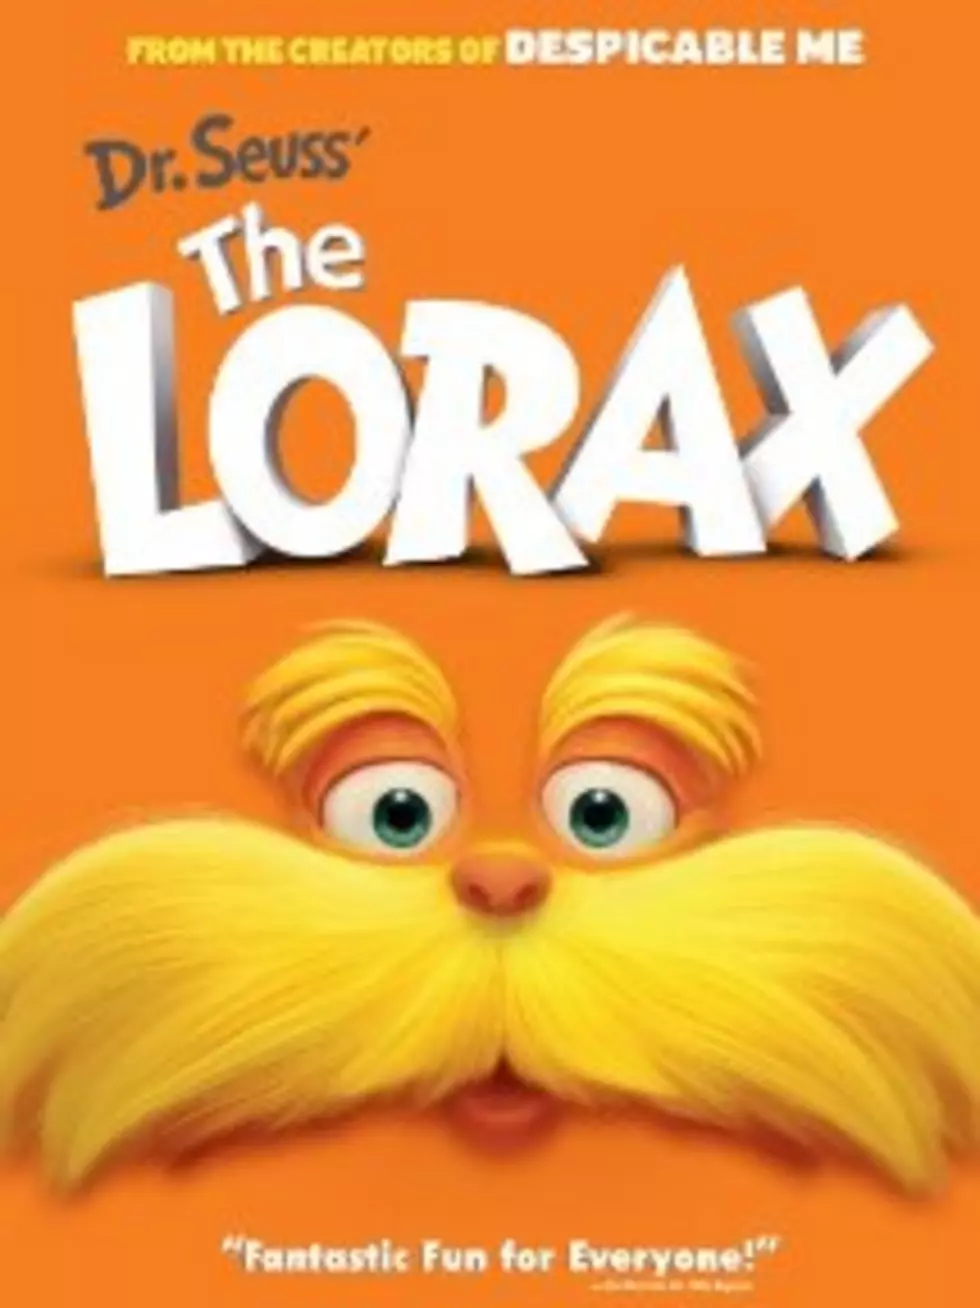 This Friday Night&#8217;s FREE Downtown Movie Is &#8220;Dr. Suess&#8217; The Lorax&#8221;